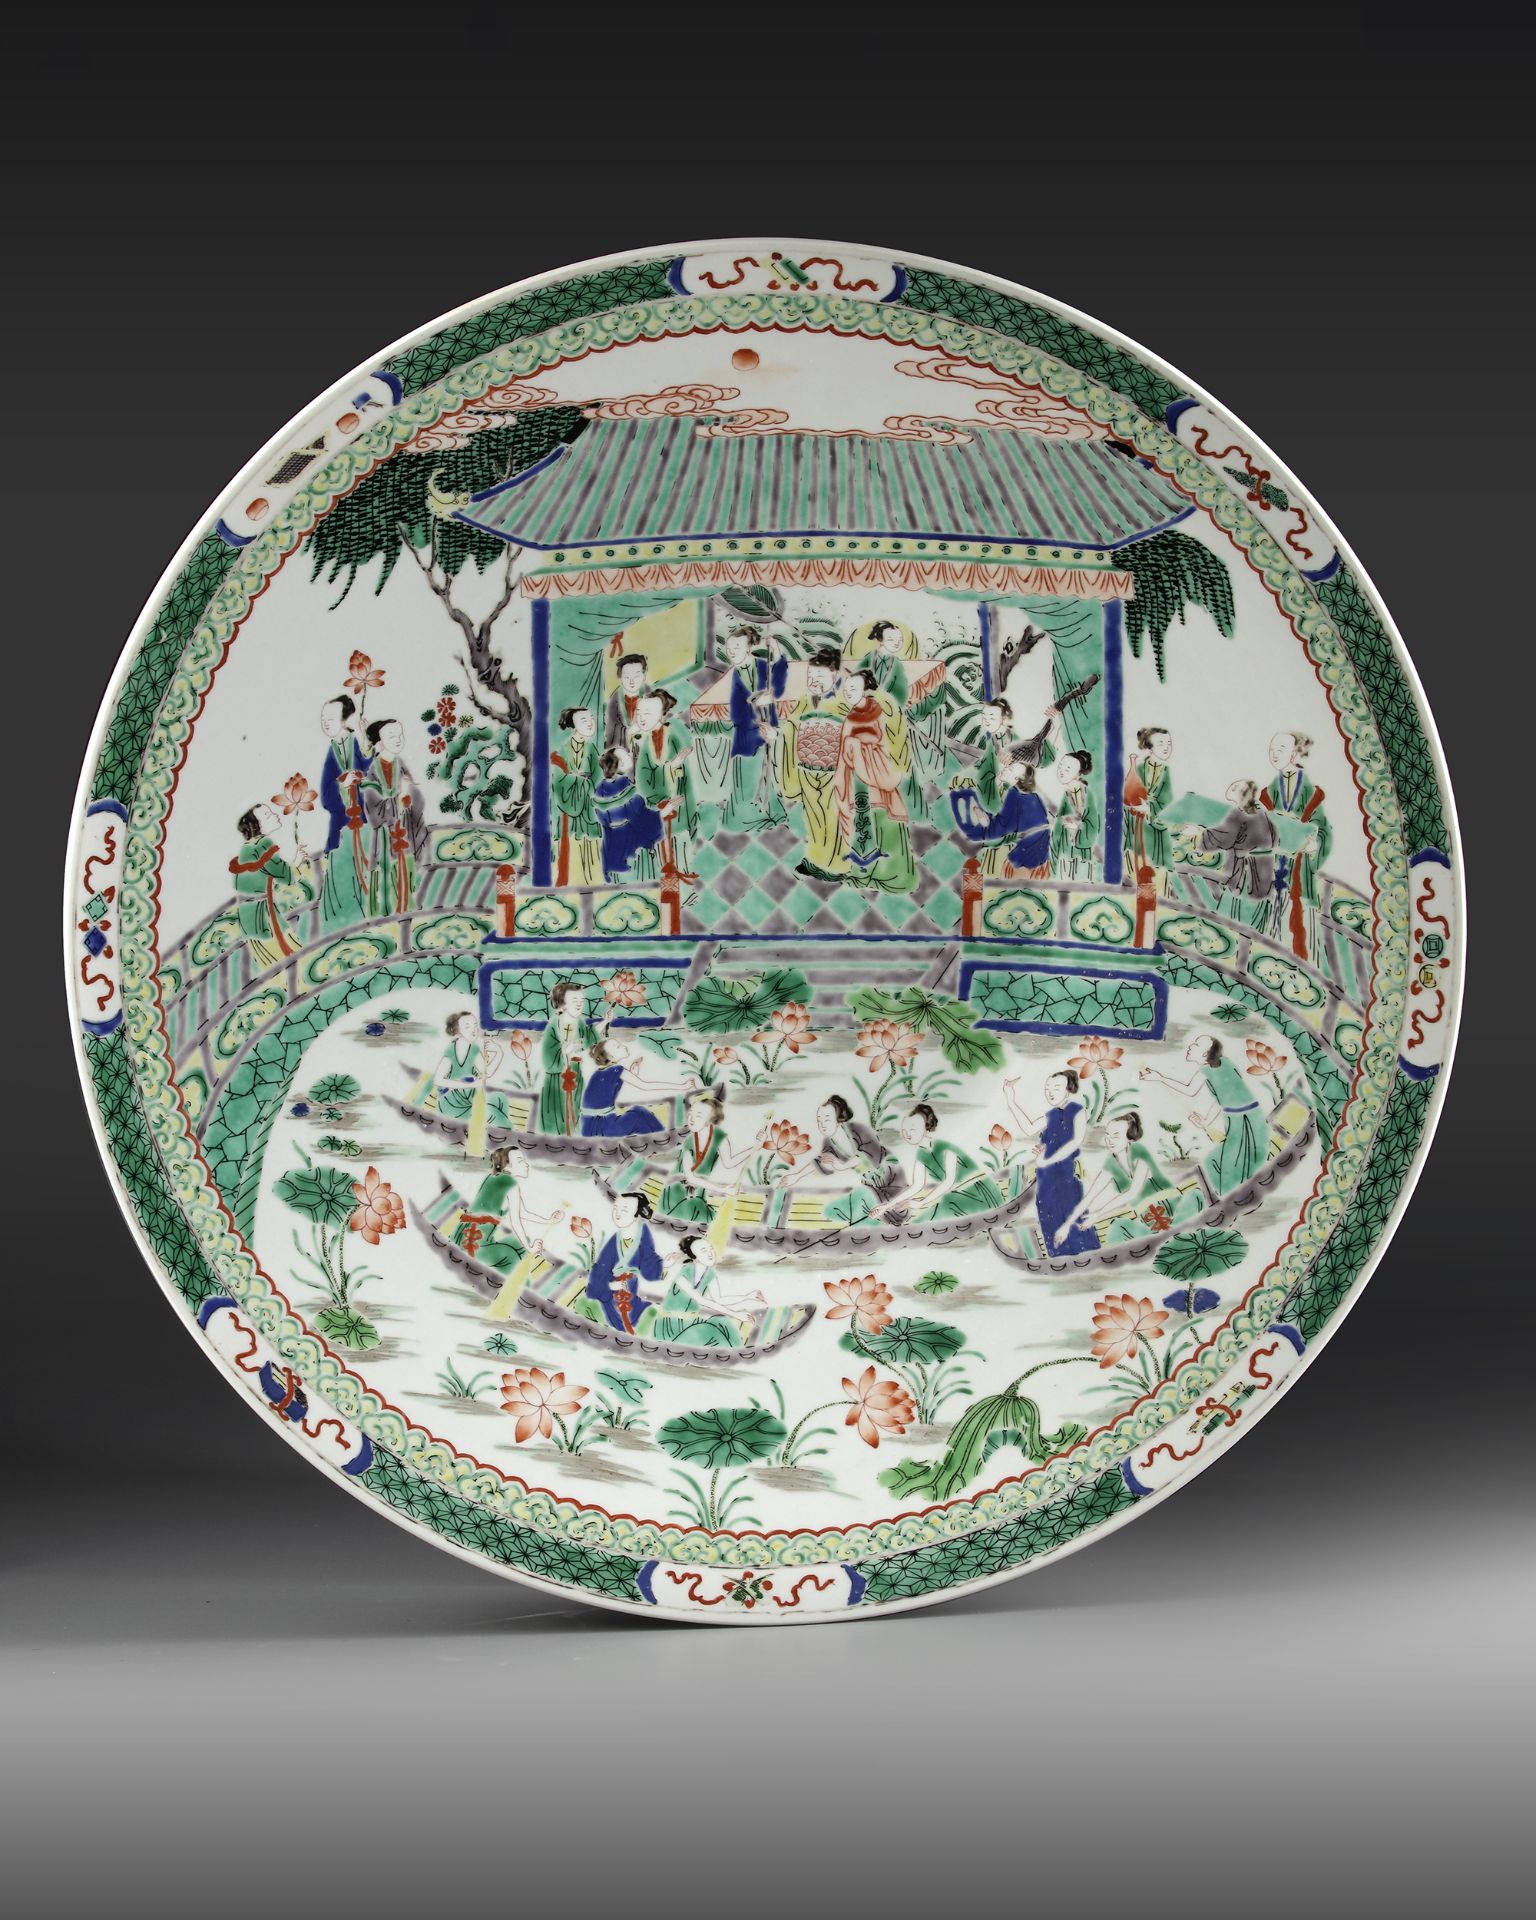 A LARGE CHINESE CONICAL SHAPED FAMILLE VERTE CHARGER, QING DYNASTY (1644-1911) LATE 19TH CENTURY